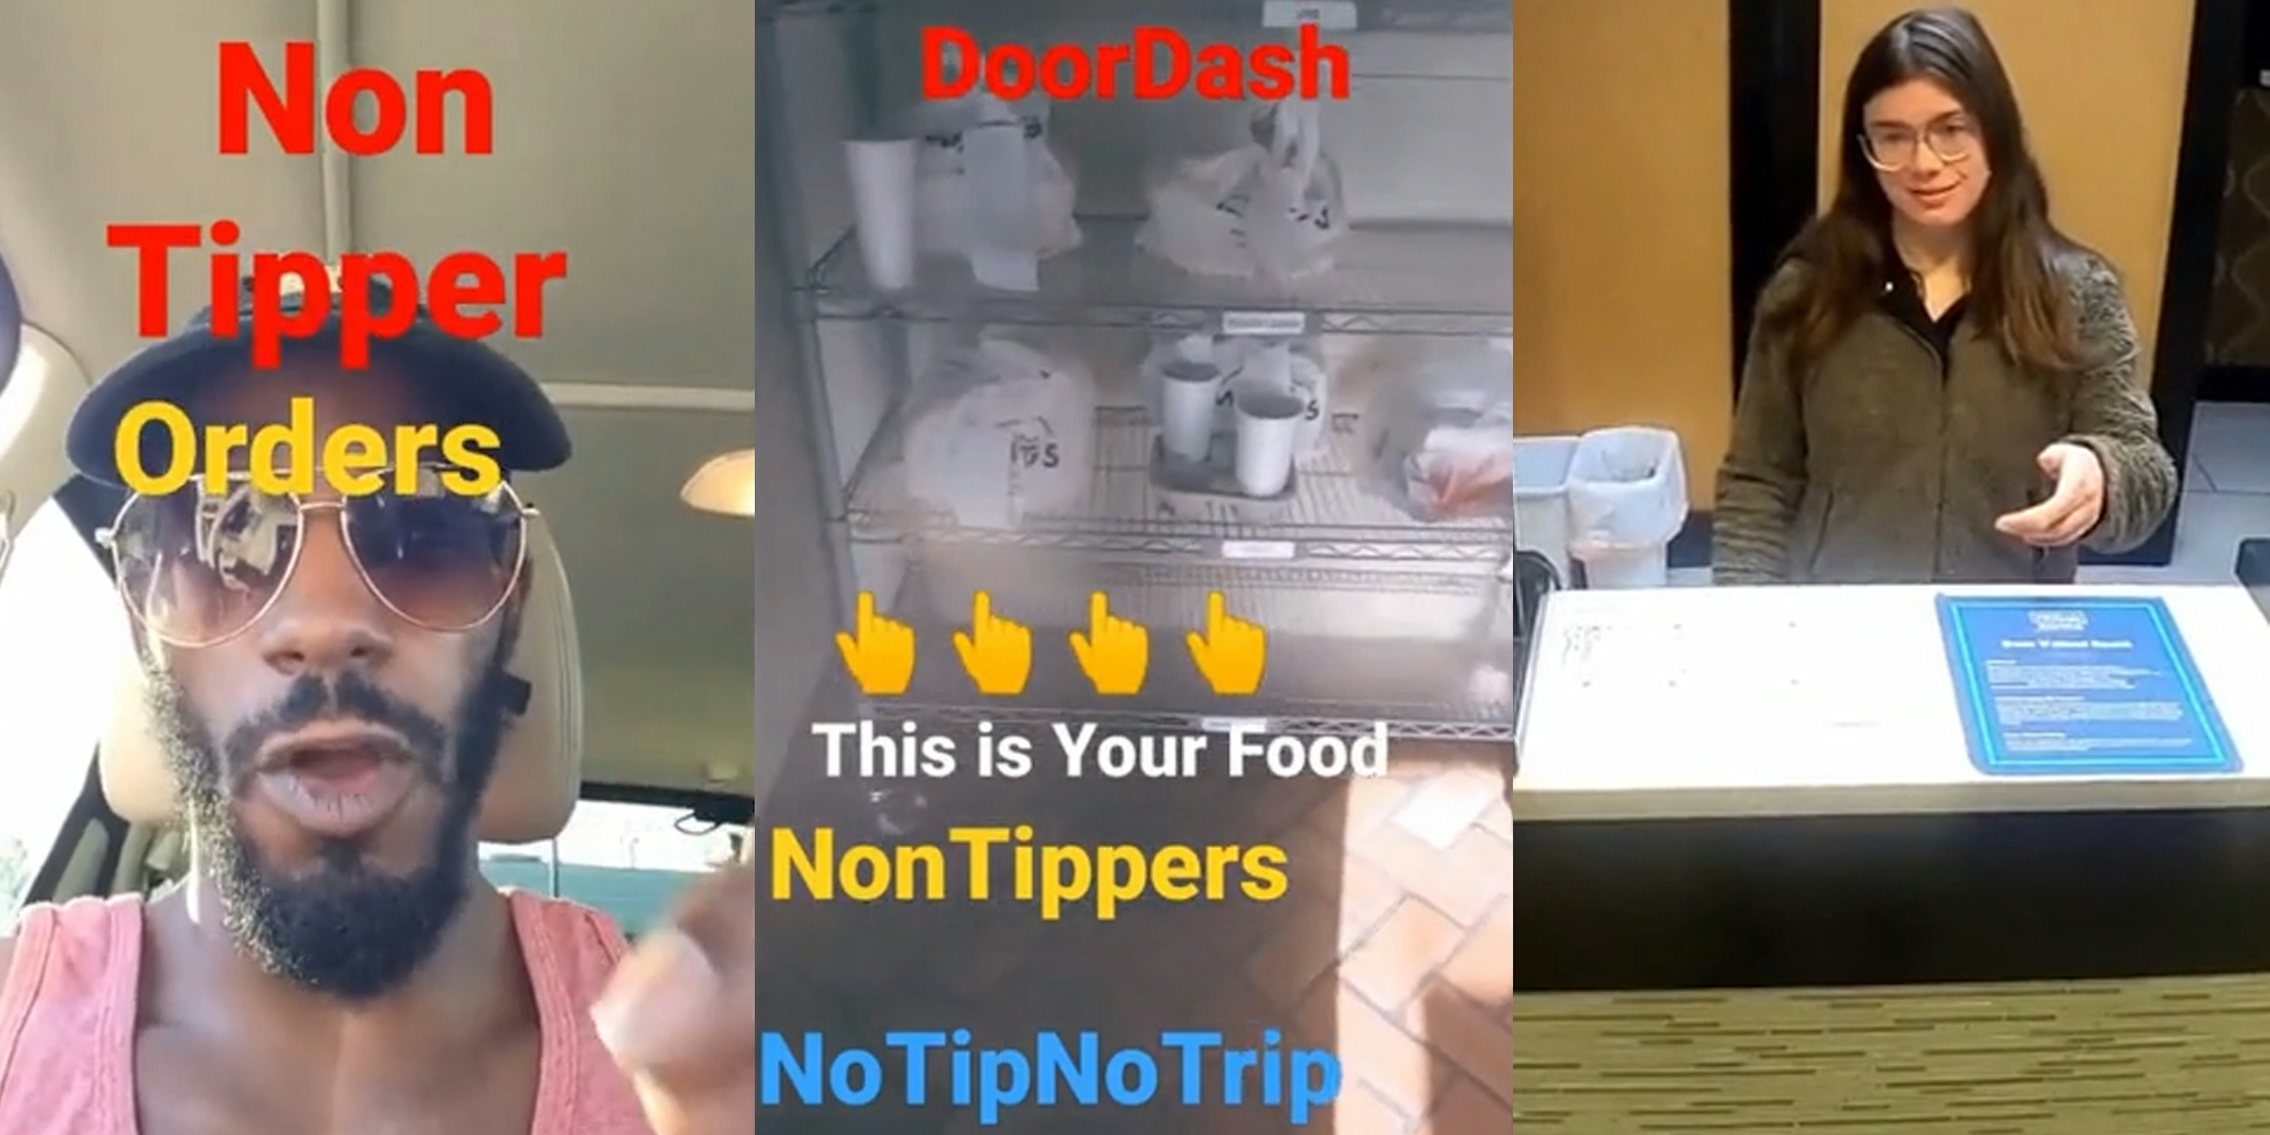 DoorDash driver speaking in car with caption 'Non Tipper Orders' (l) DoorDash food on shelf with caption 'DoorDash This is Your Food NonTippers NoTipNoTrip' (c) woman with hand out over counter (r)